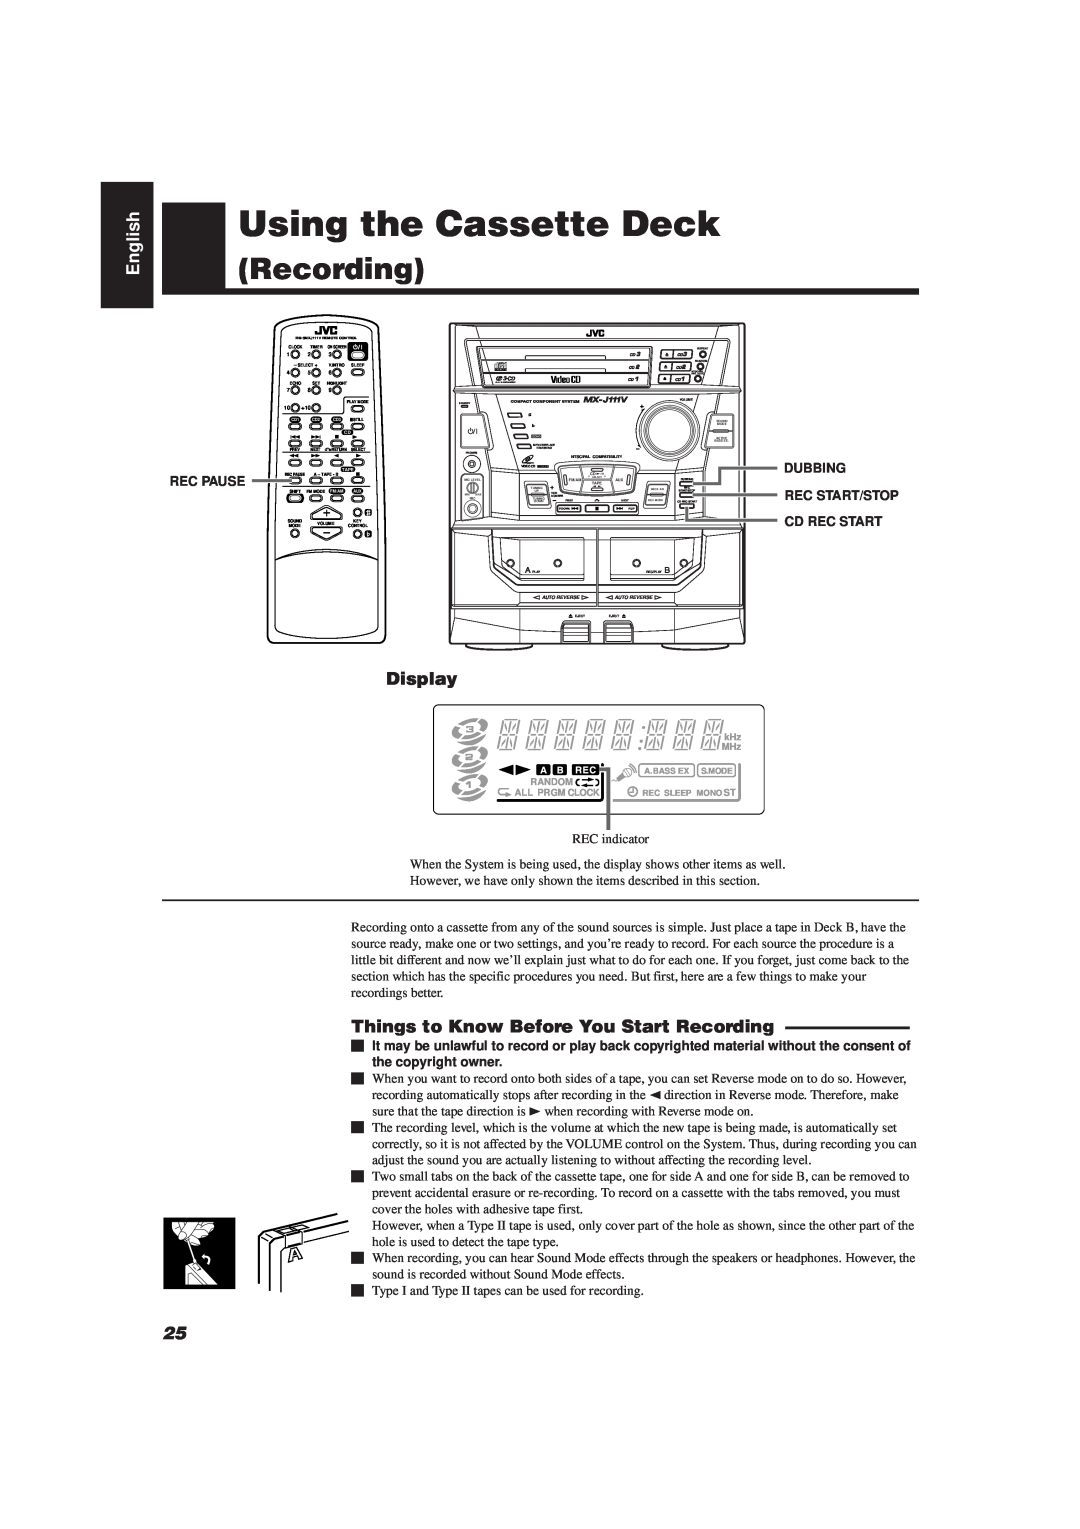 JVC MX-J111V Things to Know Before You Start Recording, Using the Cassette Deck, English, Display, Dubbing, Rec Pause 